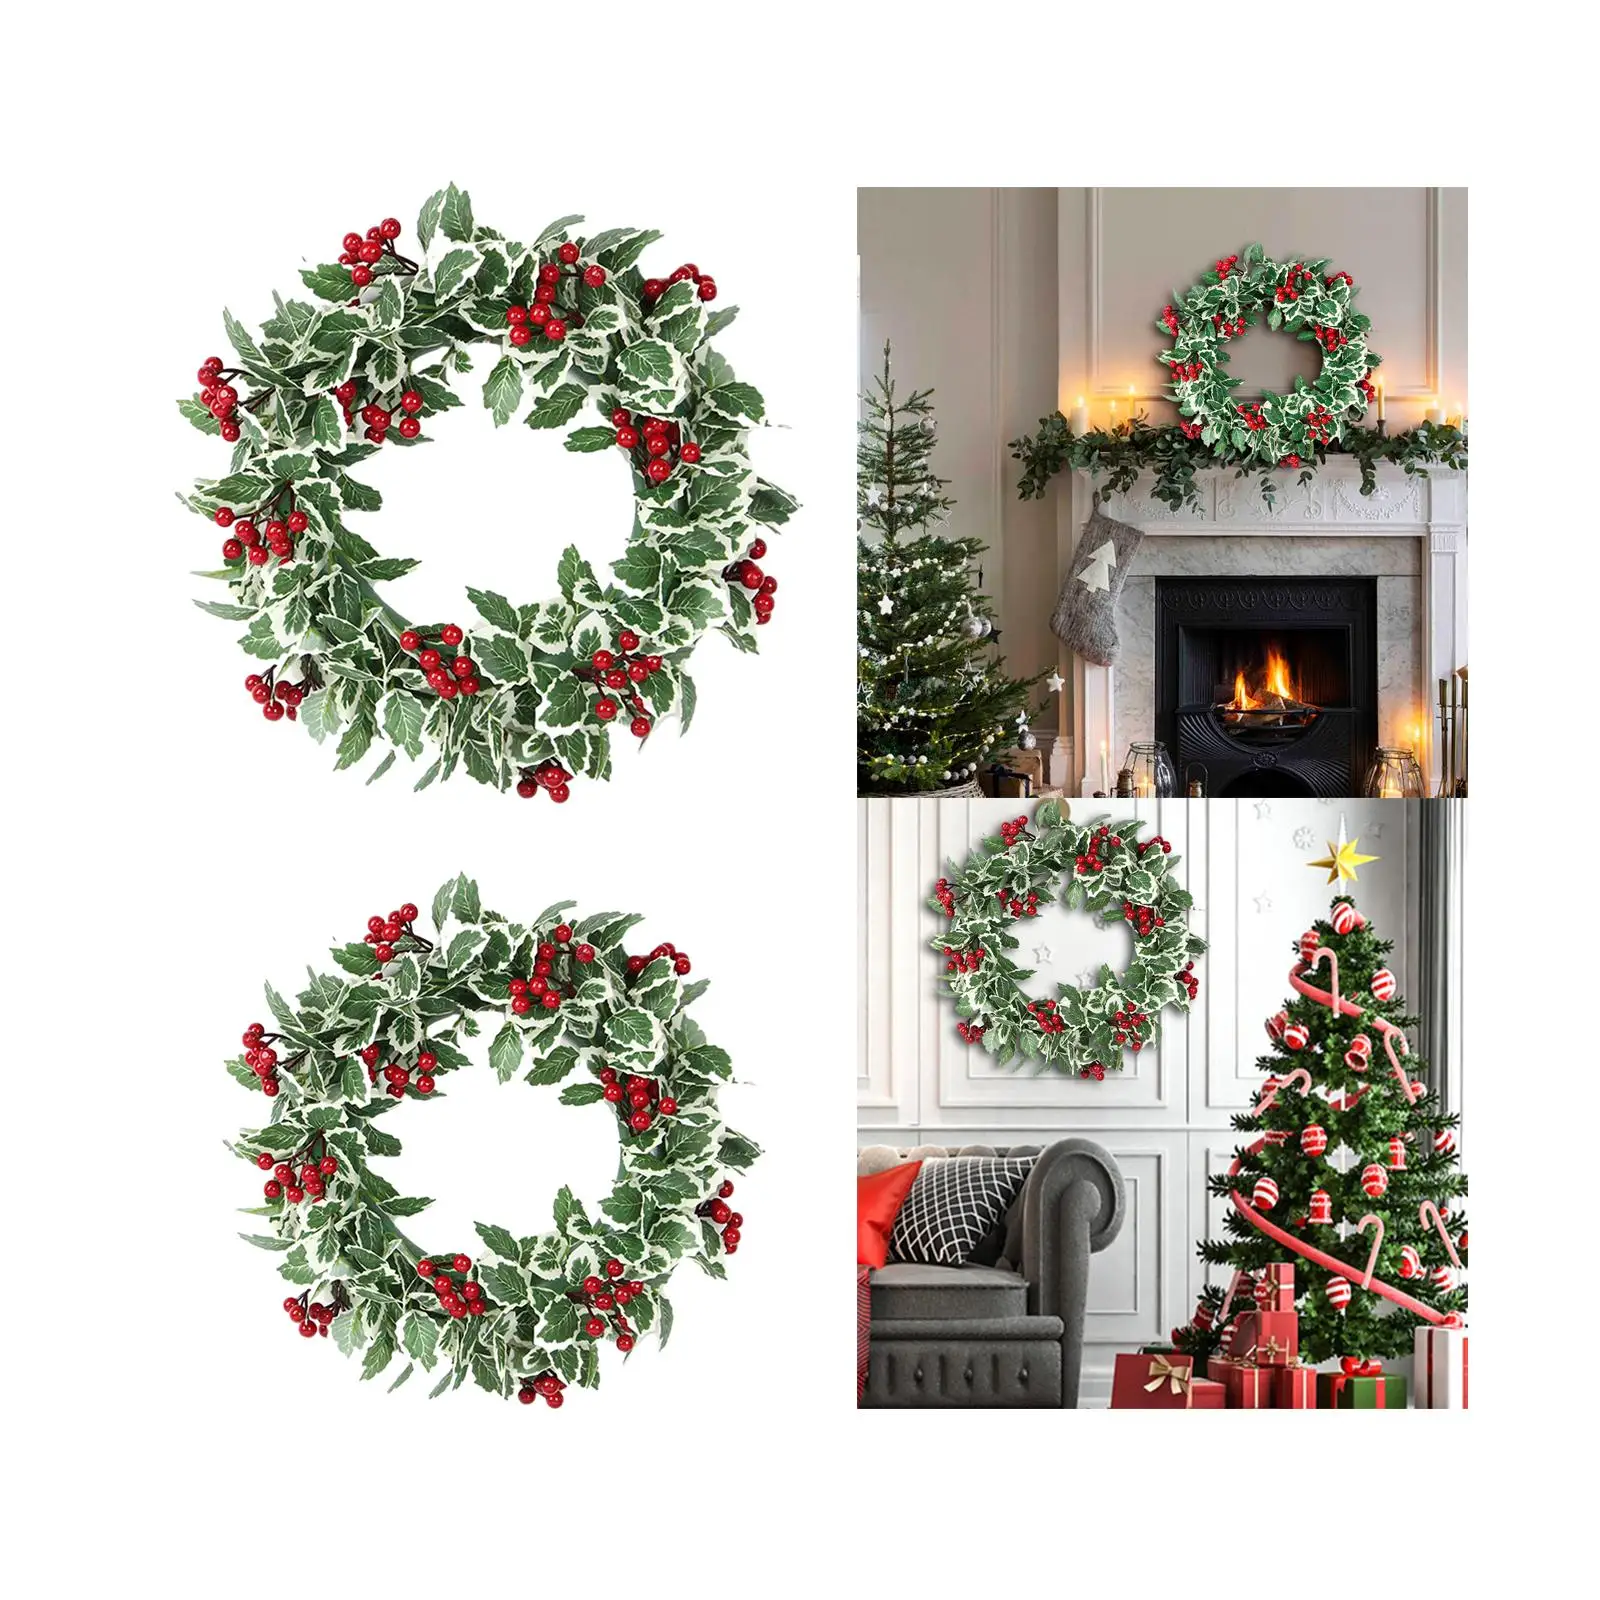 Christmas Wreath Red Berries Green Leaves Housewarming Christmas Holiday Garland for Living Room Home Dining Room Party Garden